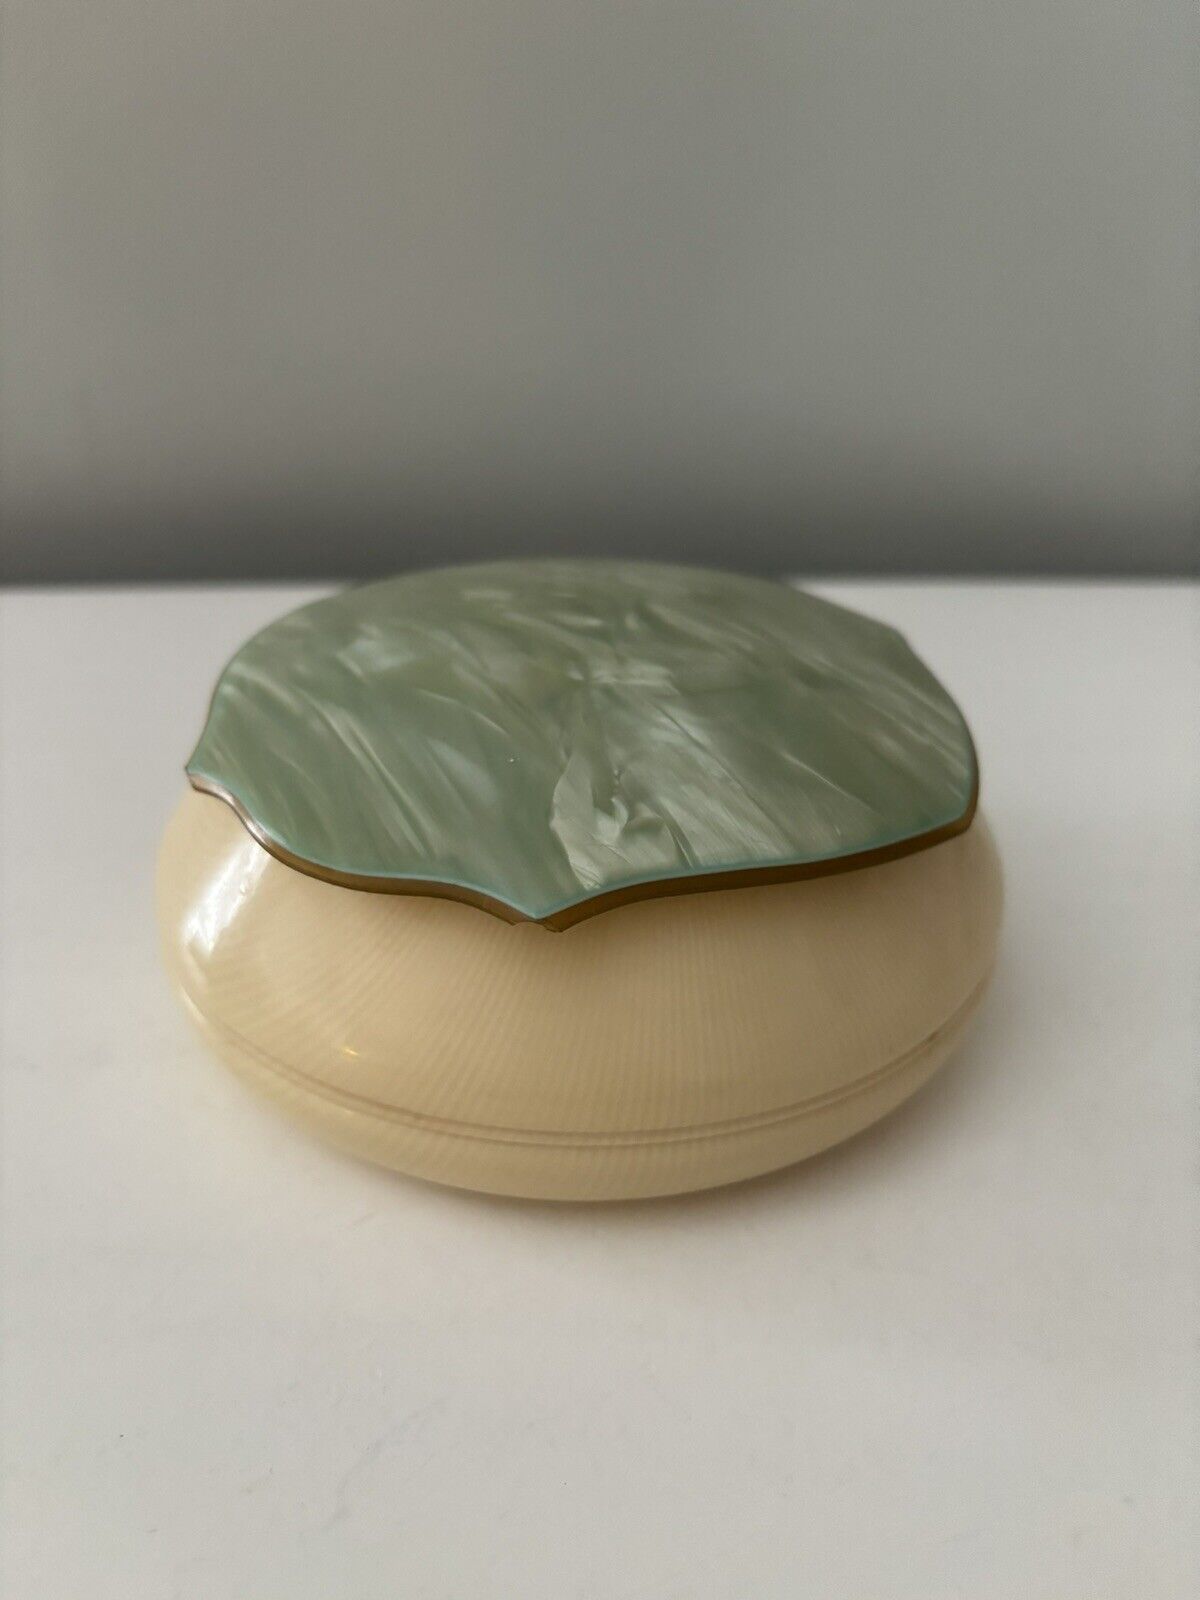 Vintage White Ivory Celluloid Vanity Powder Box With Marbled Lid